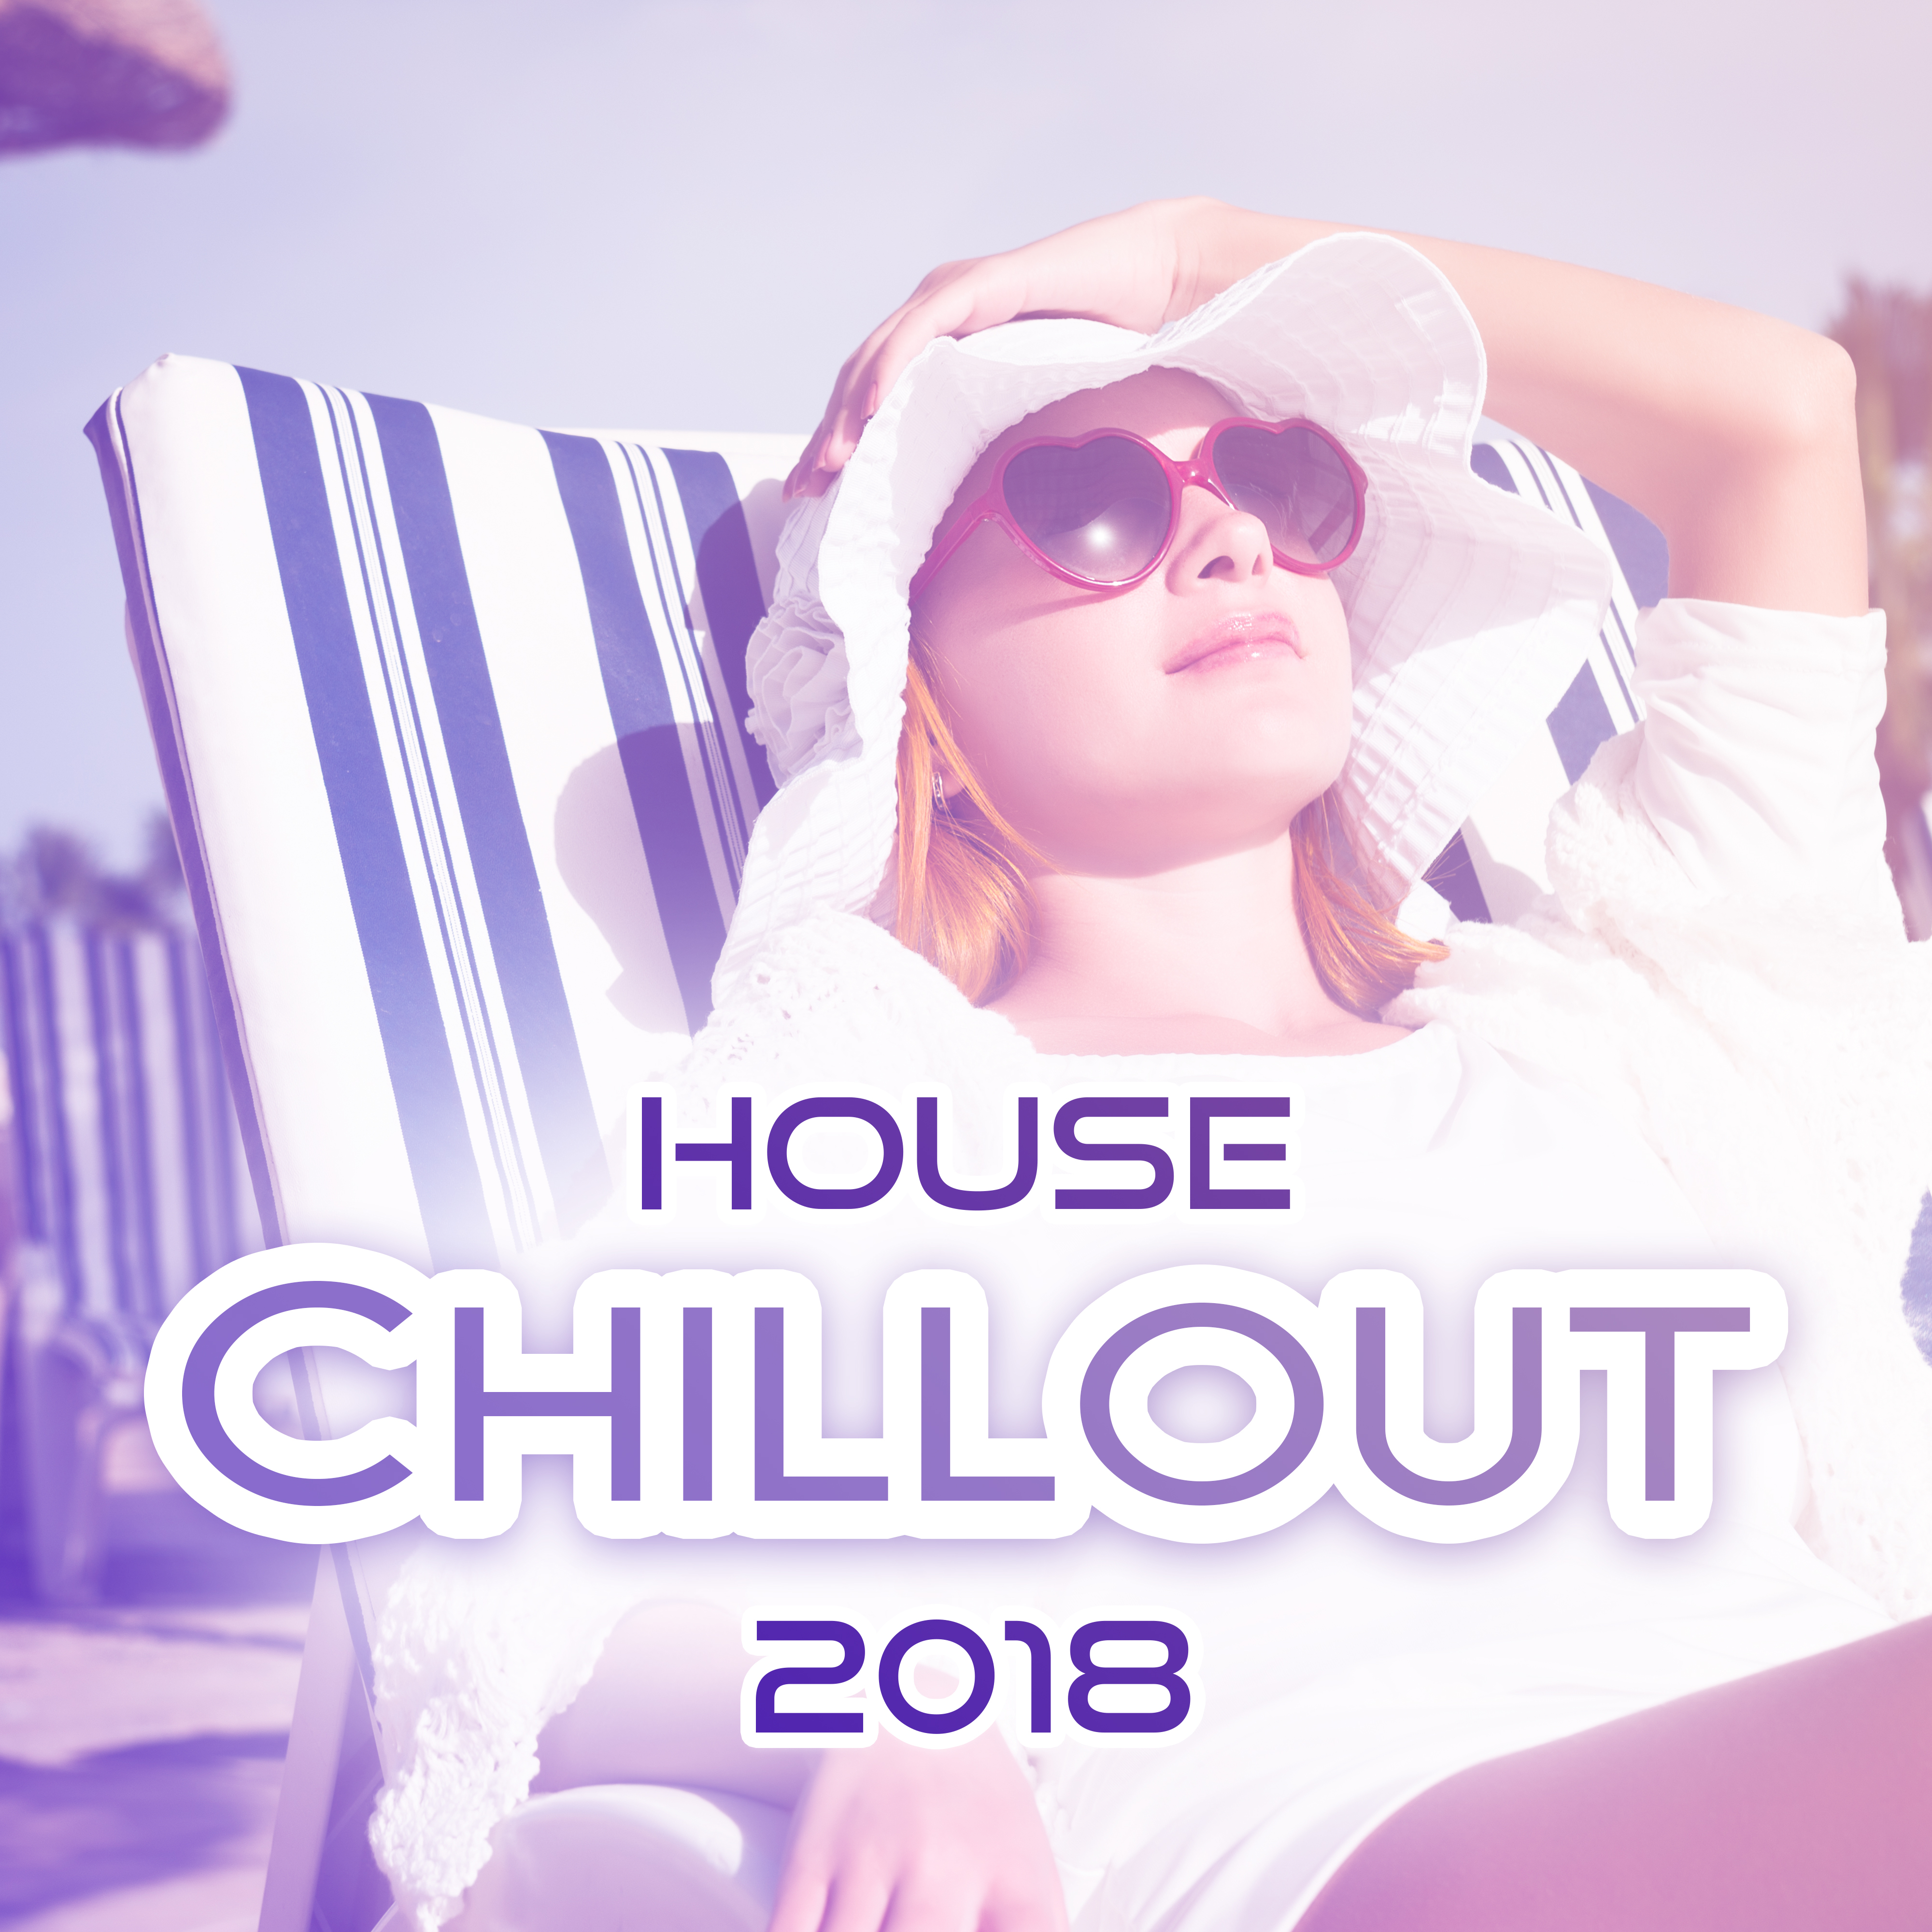 House Chillout 2018